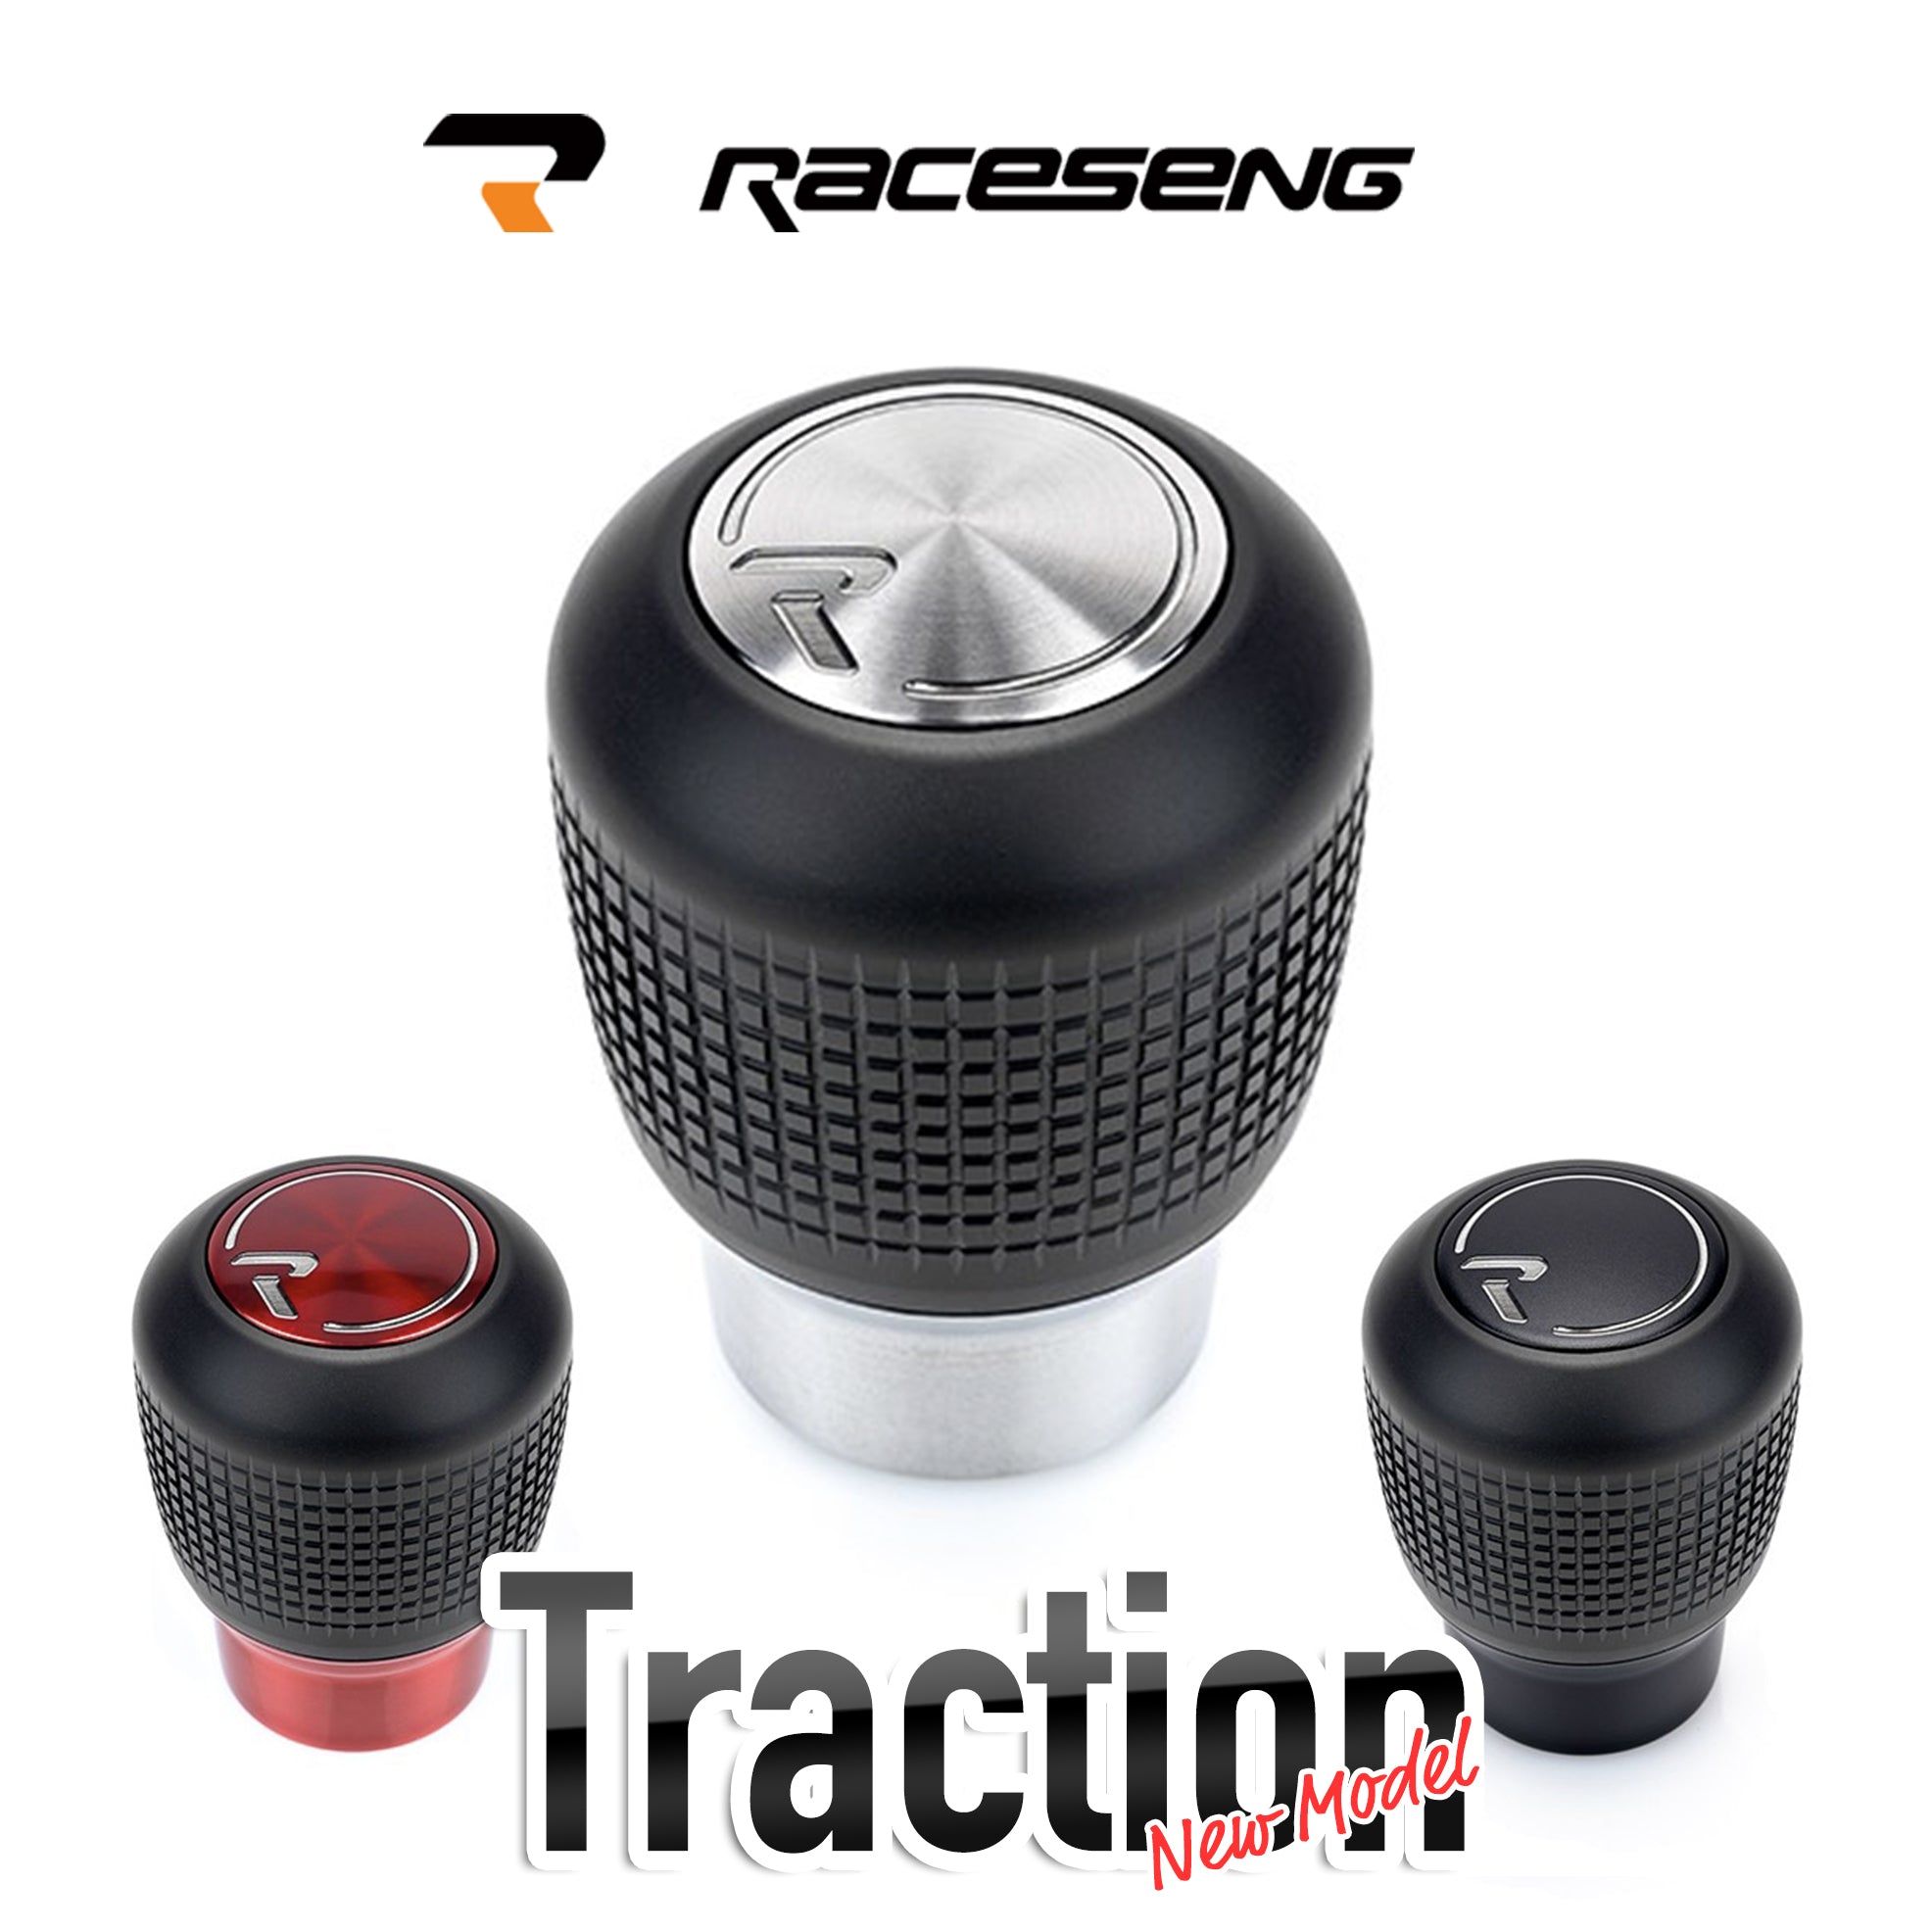 RACESENG – tagged 